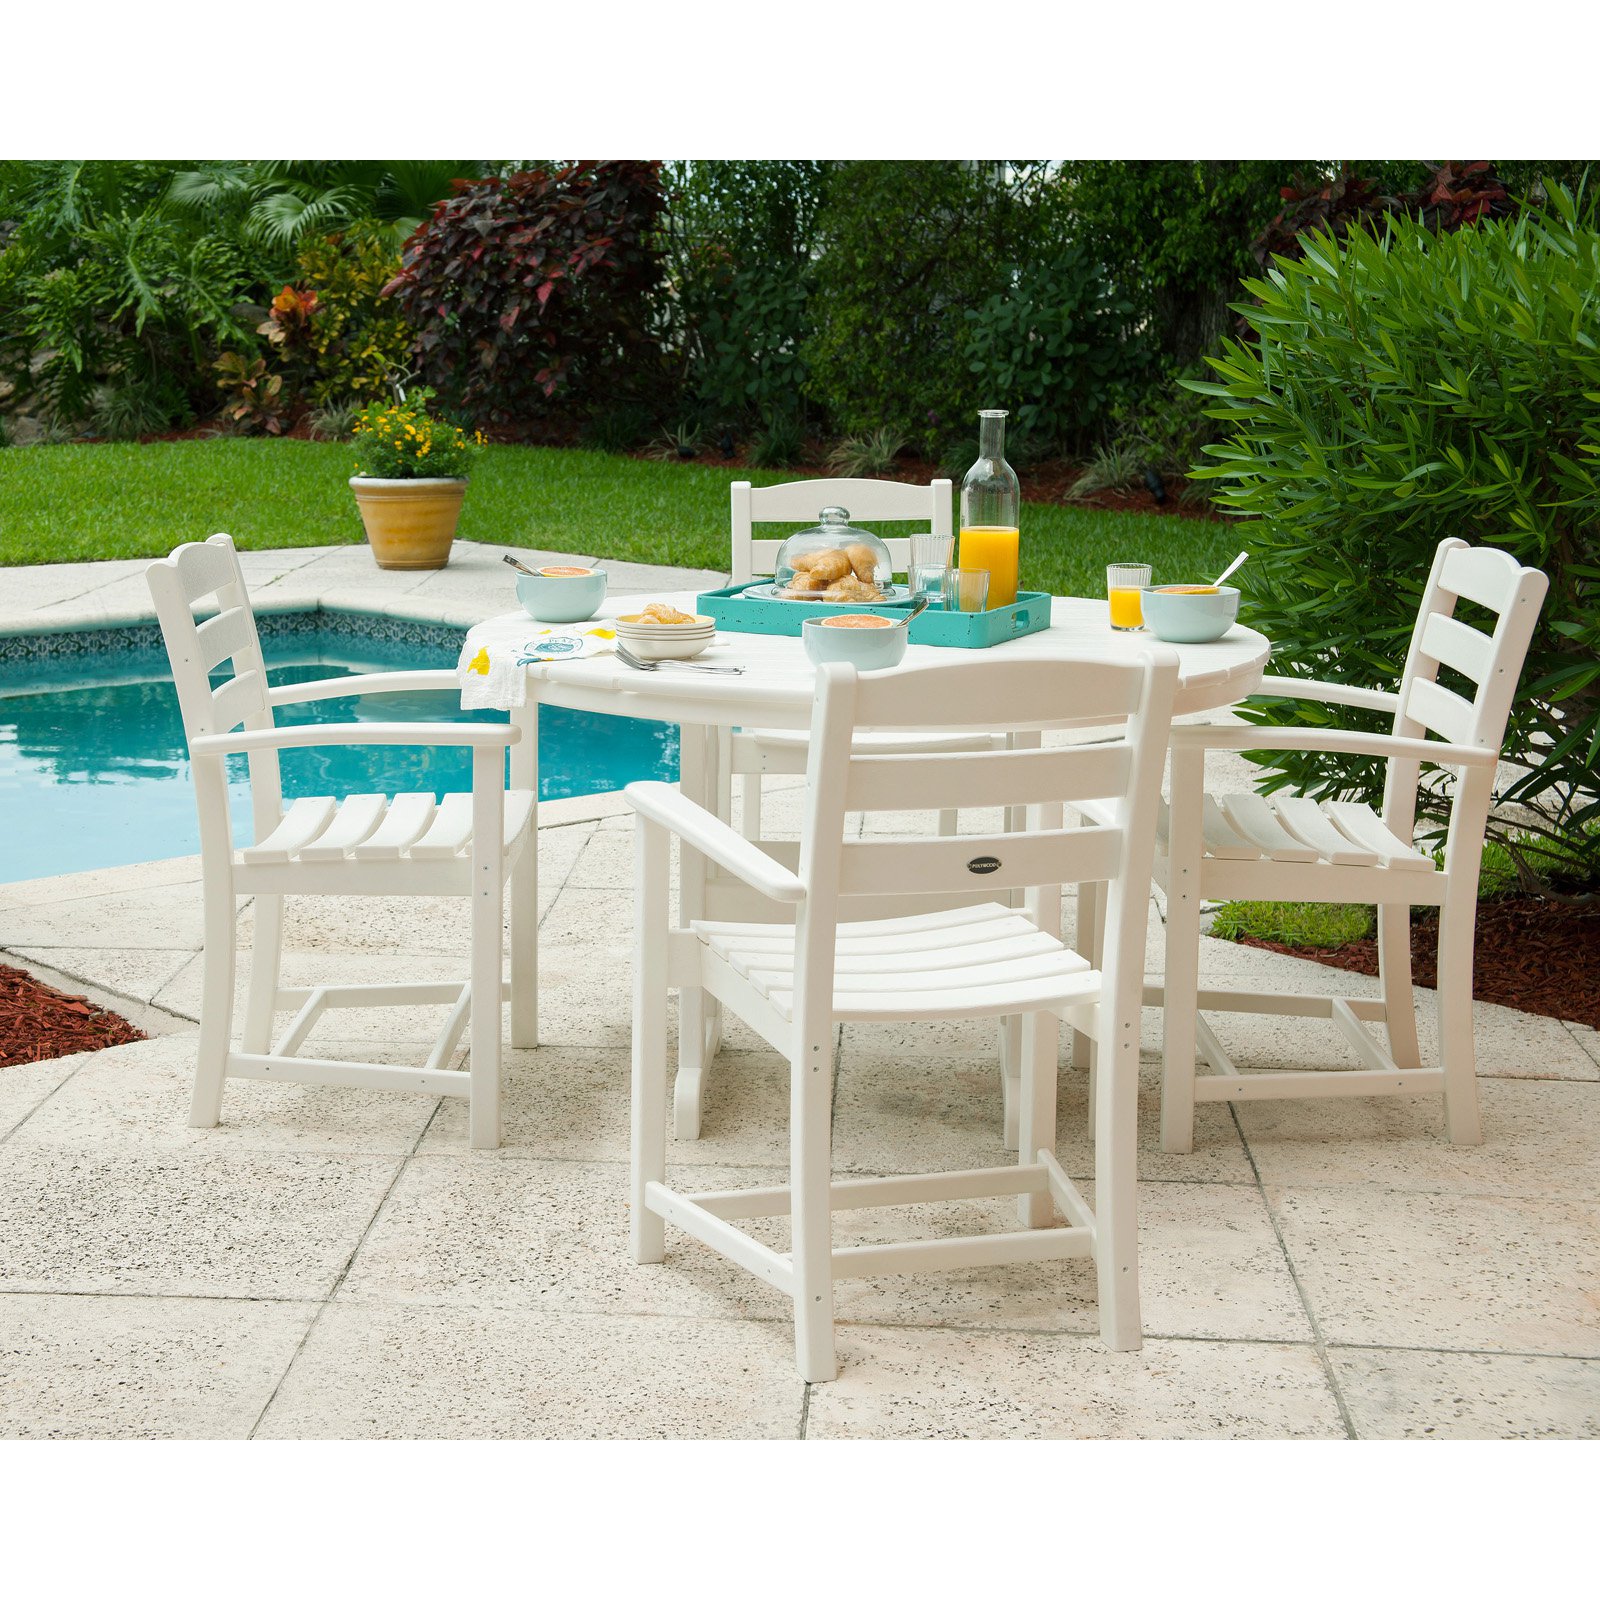 POLYWOOD La Casa Cafe 7-Piece Dining Set in White - image 4 of 4